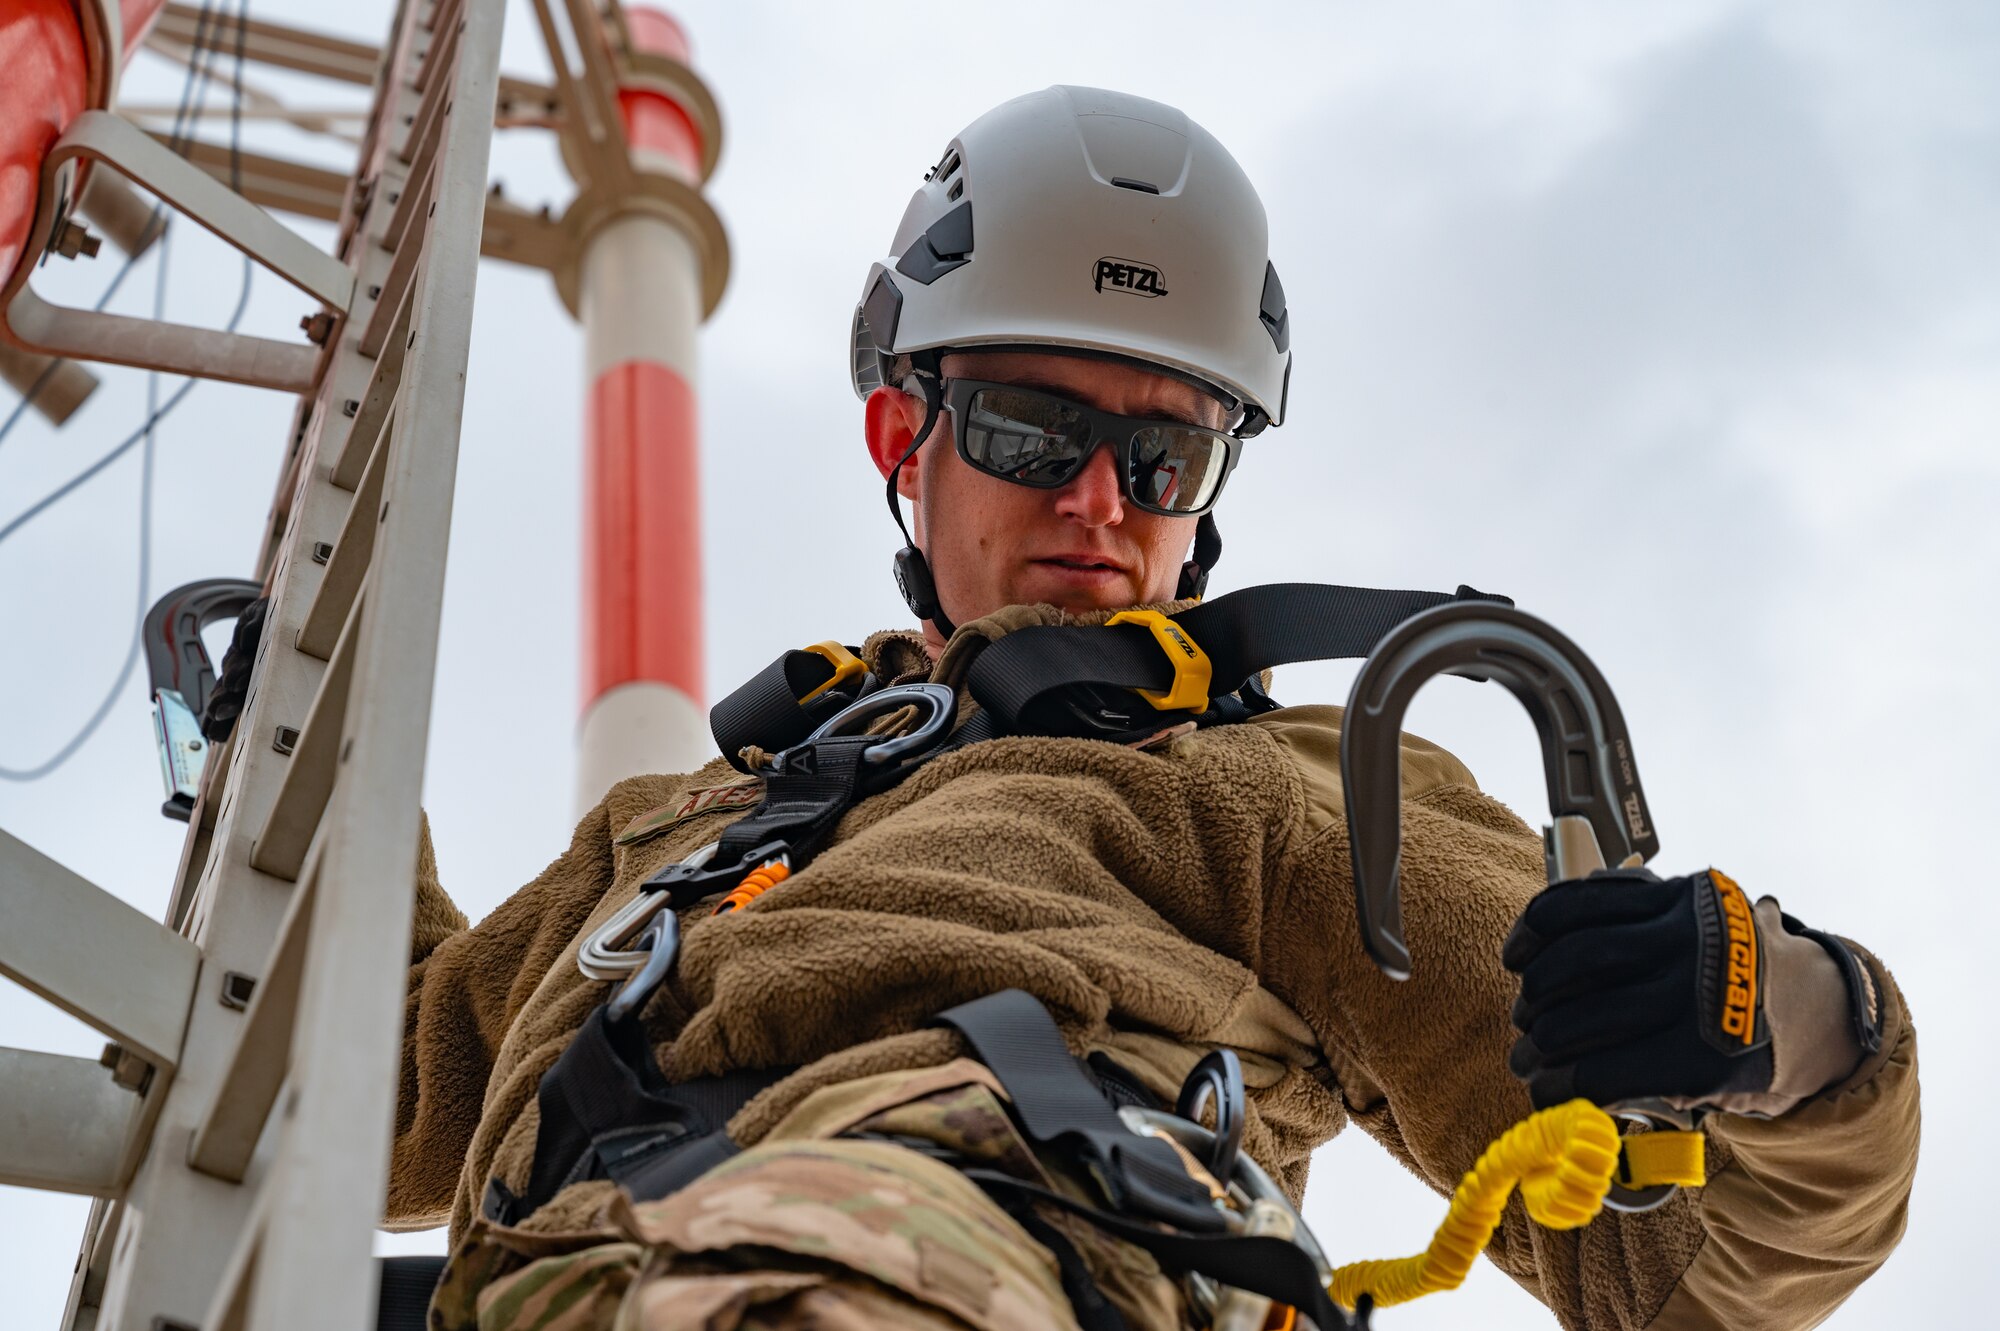 RAWS technicians inspect wire connections on glide slope antenna tower.